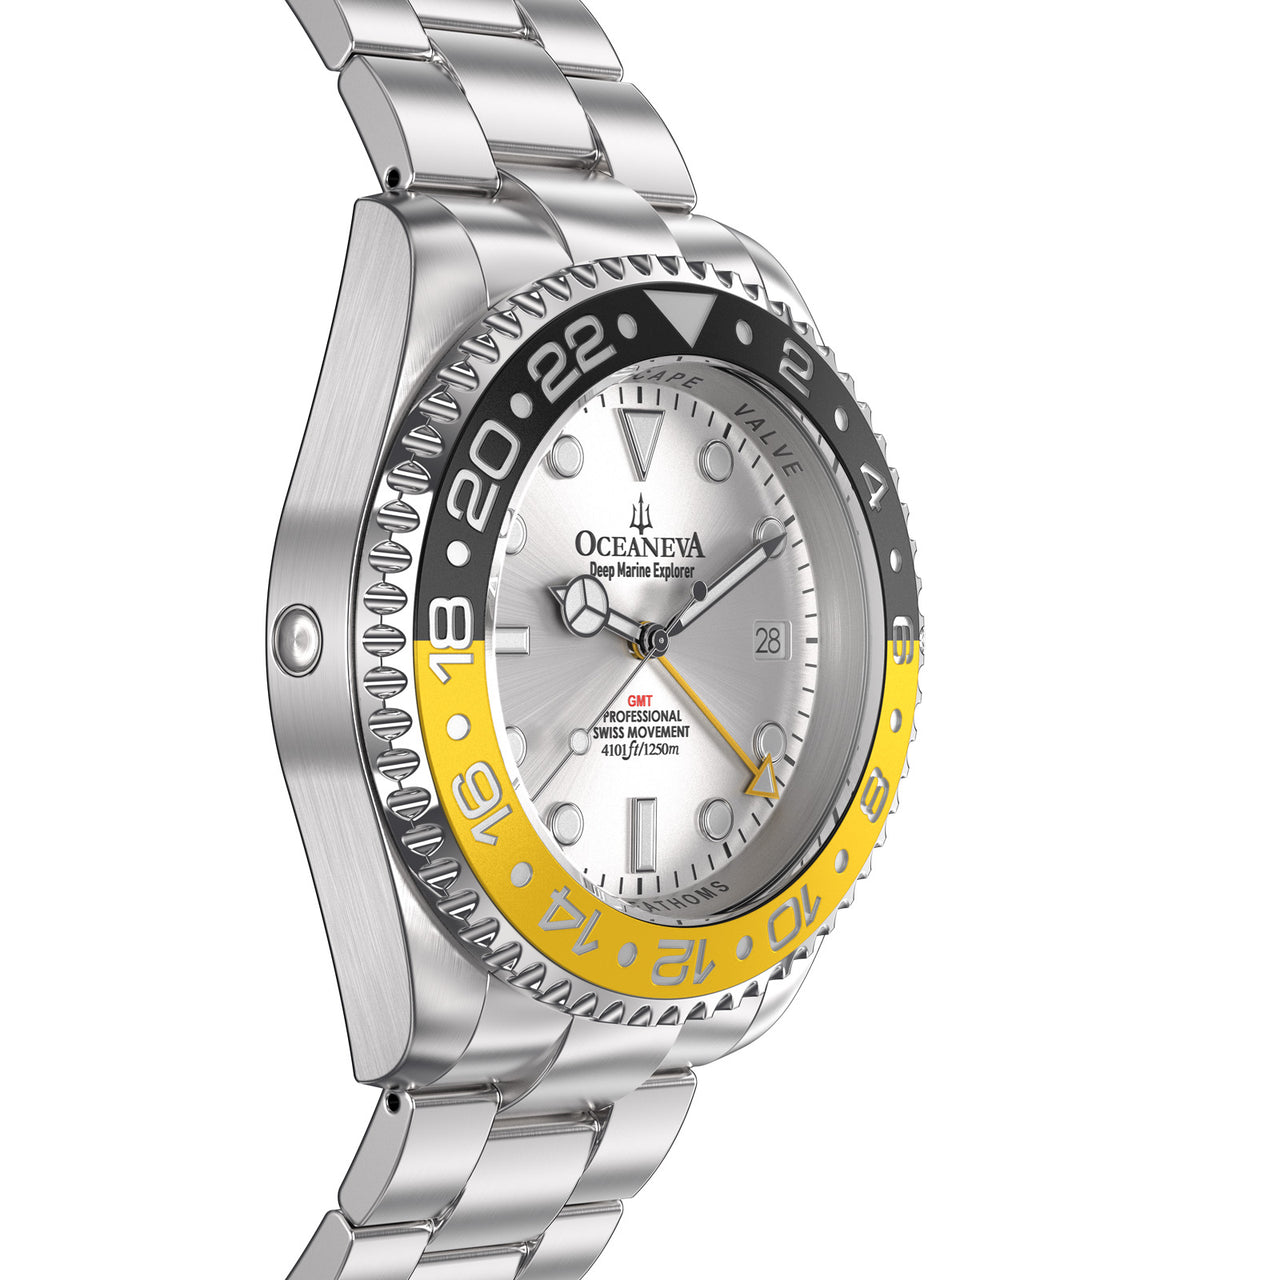 Oceaneva 1250M GMT Dive Watch Silver Black and Yellow Side Helium Escape Valve View